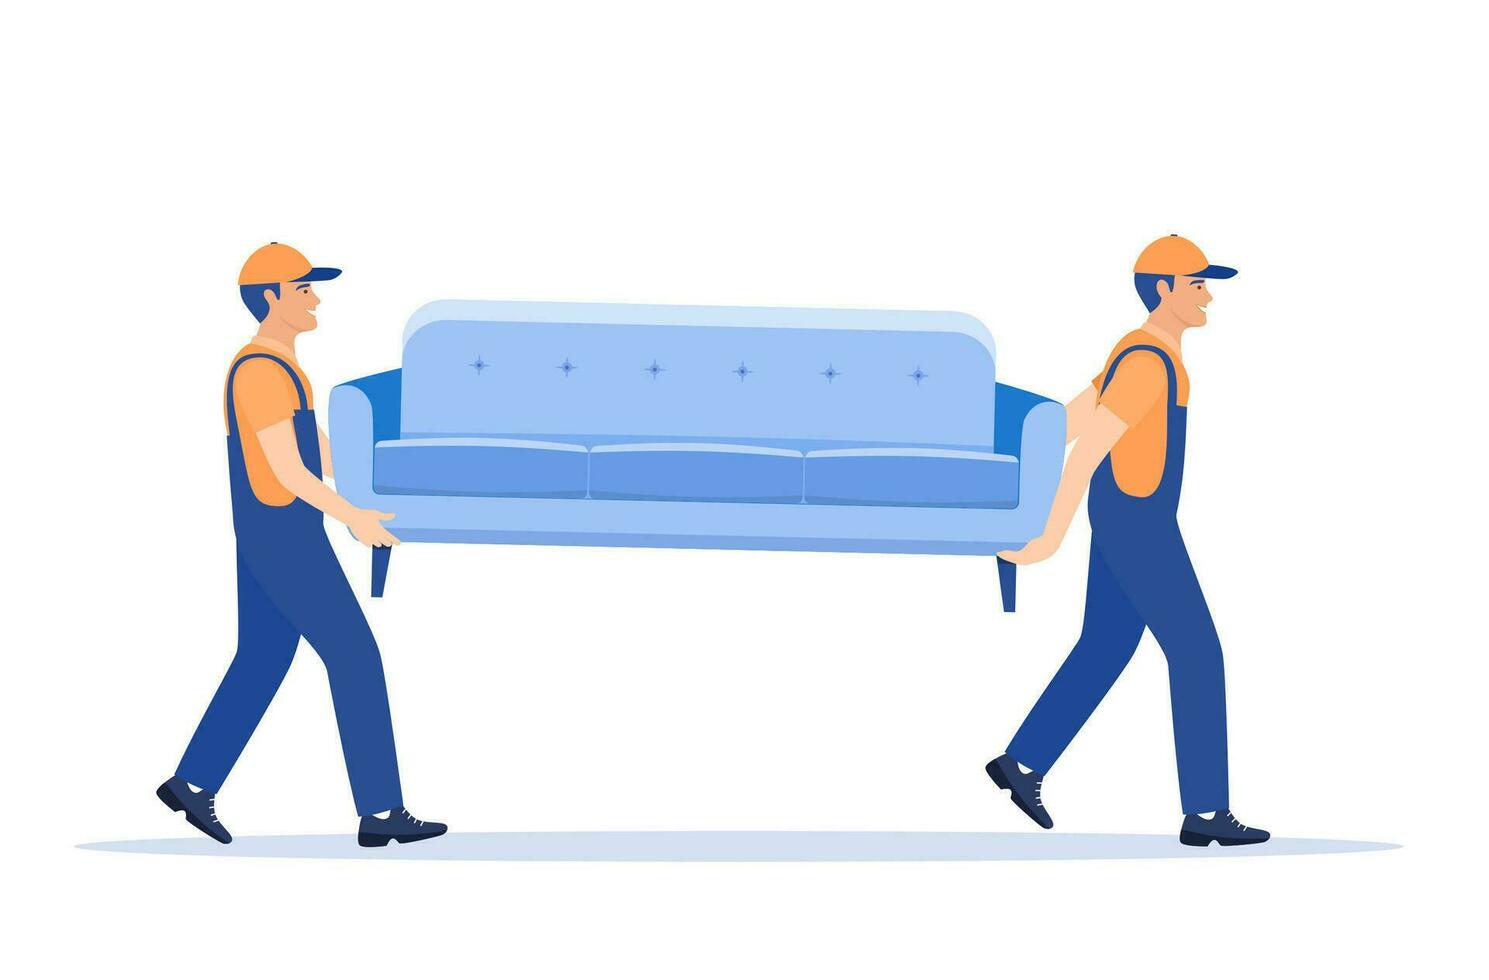 Delivery character man movers carry sofa. Two porters carry couch isolated. Moving company with loaders and furniture. Delivery and relocation service concept. Vector illustration in flat style